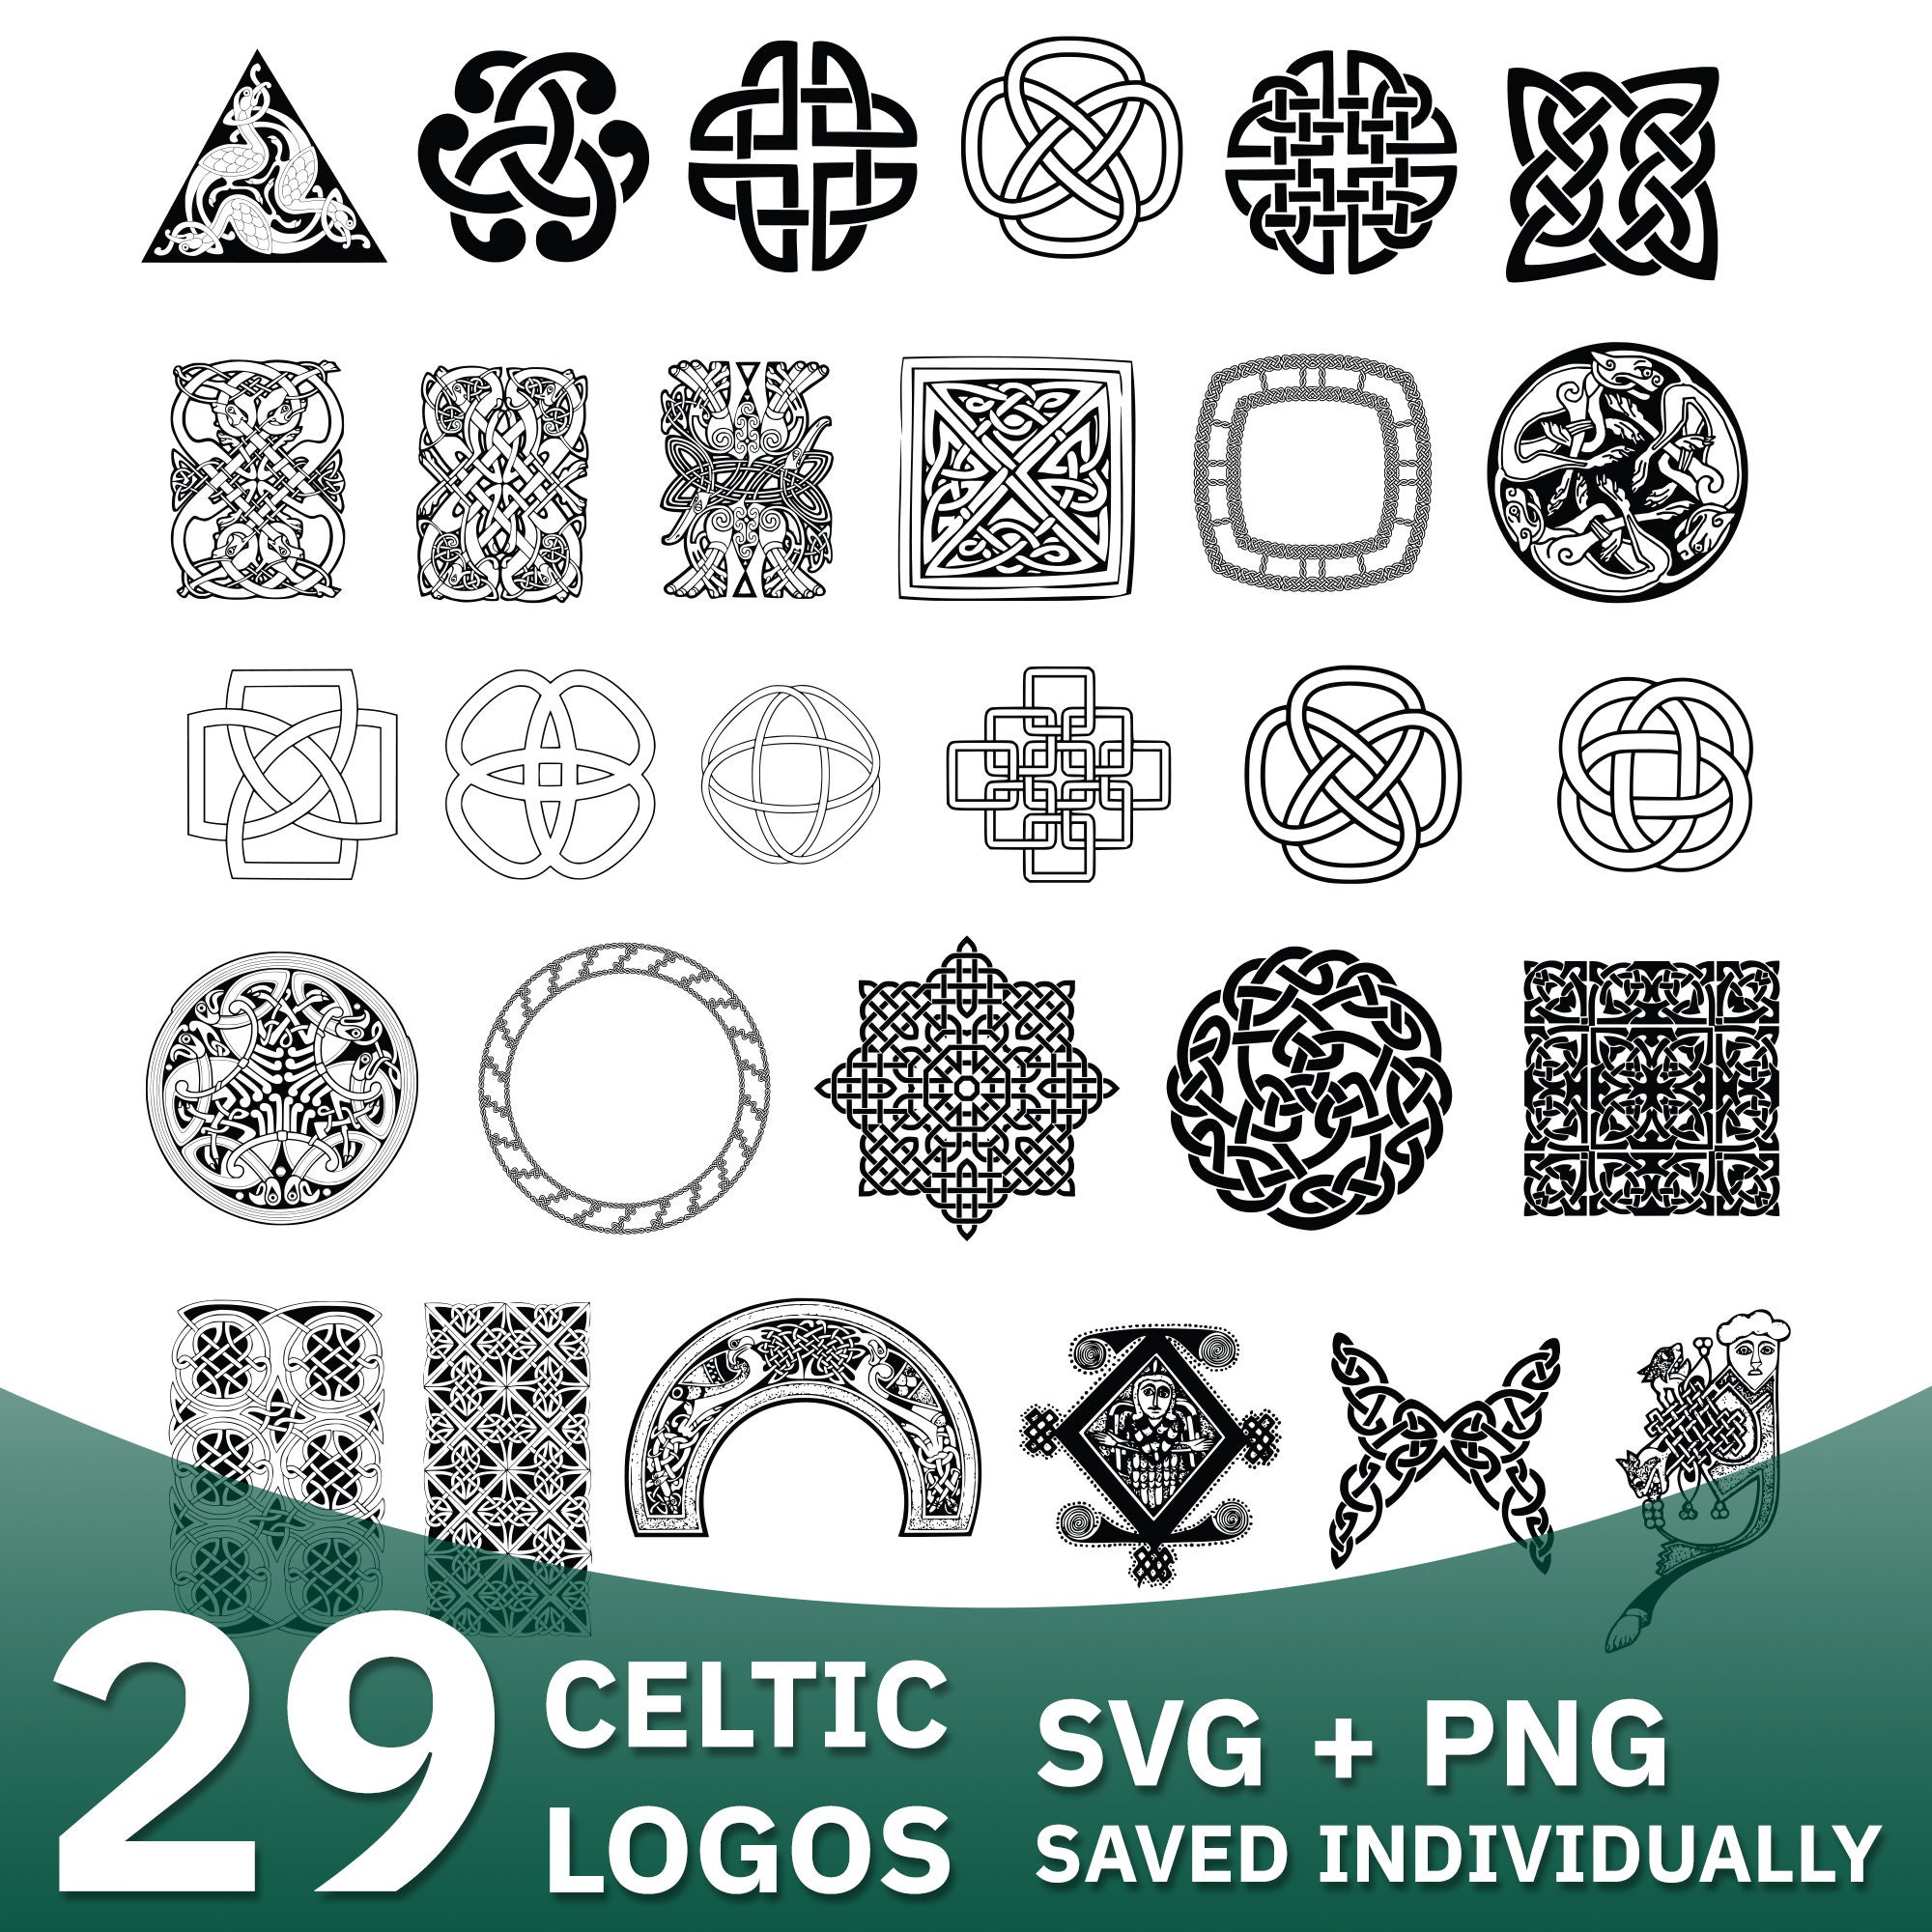 54 Celtic Knot Tattoo Designs And Ideas